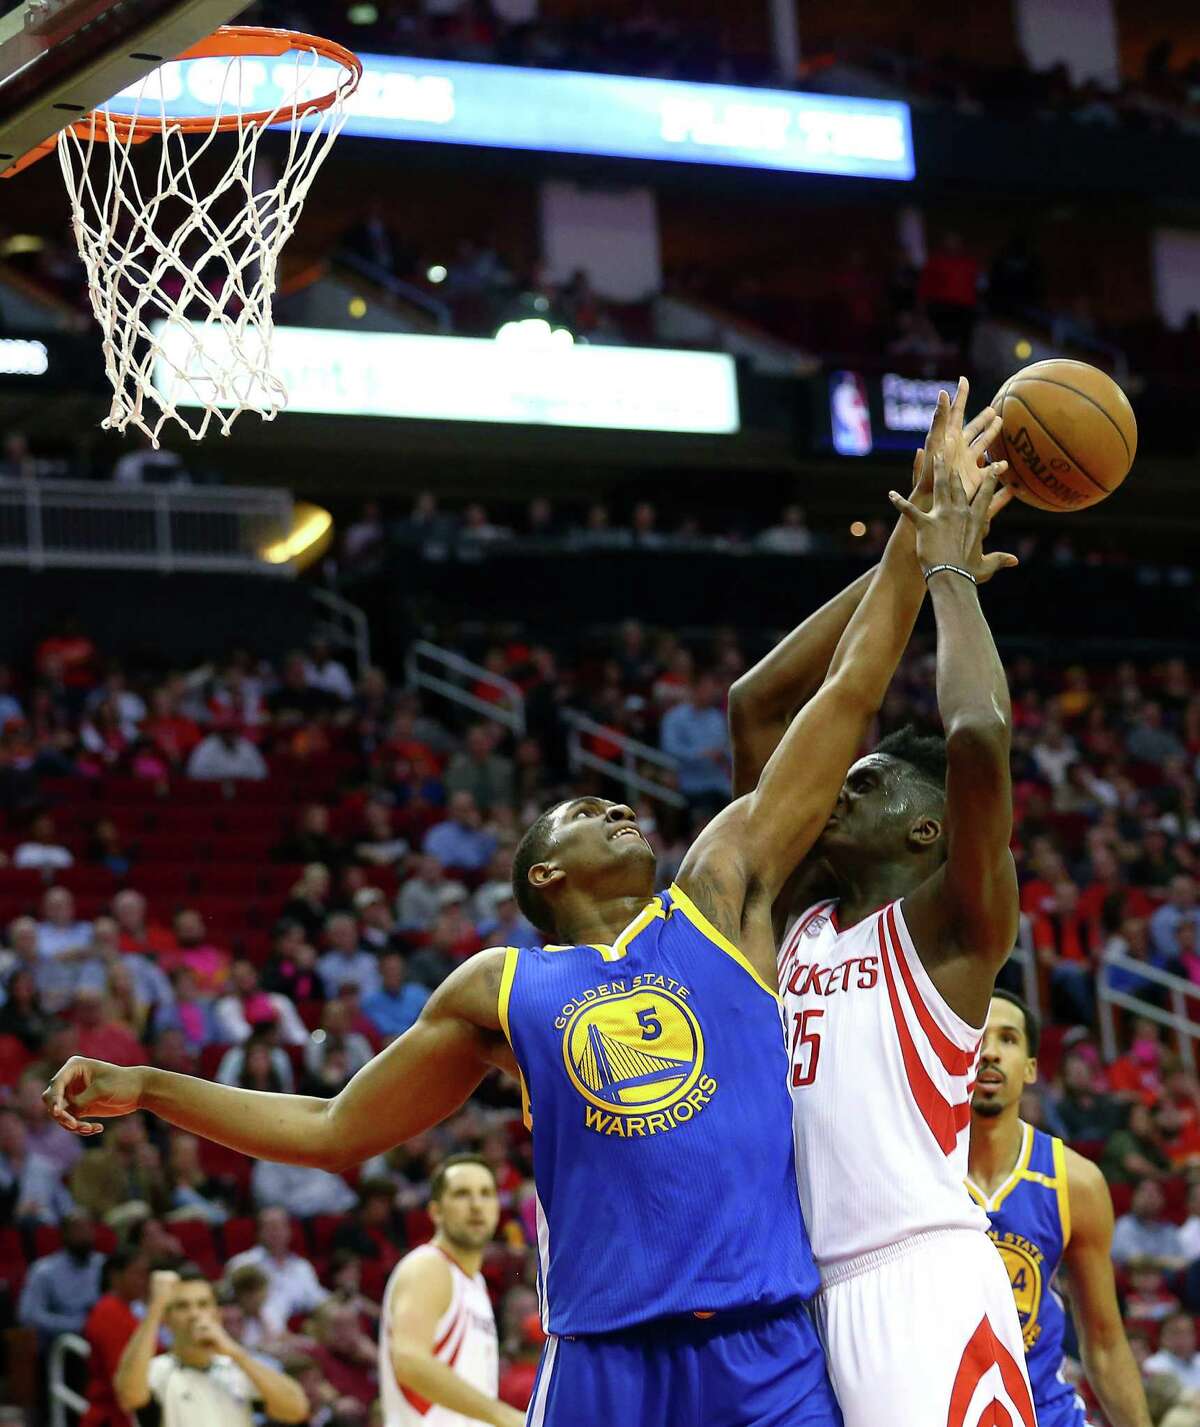 Golden State Warriors forward Kevon Looney (5) blocks a layup by Houston Rockets center Clint Capela (15) during the second quarter of an NBA game at the Toyota Center Friday, Jan. 20, 2017, in Houston. ( Jon Shapley / Houston Chronicle )